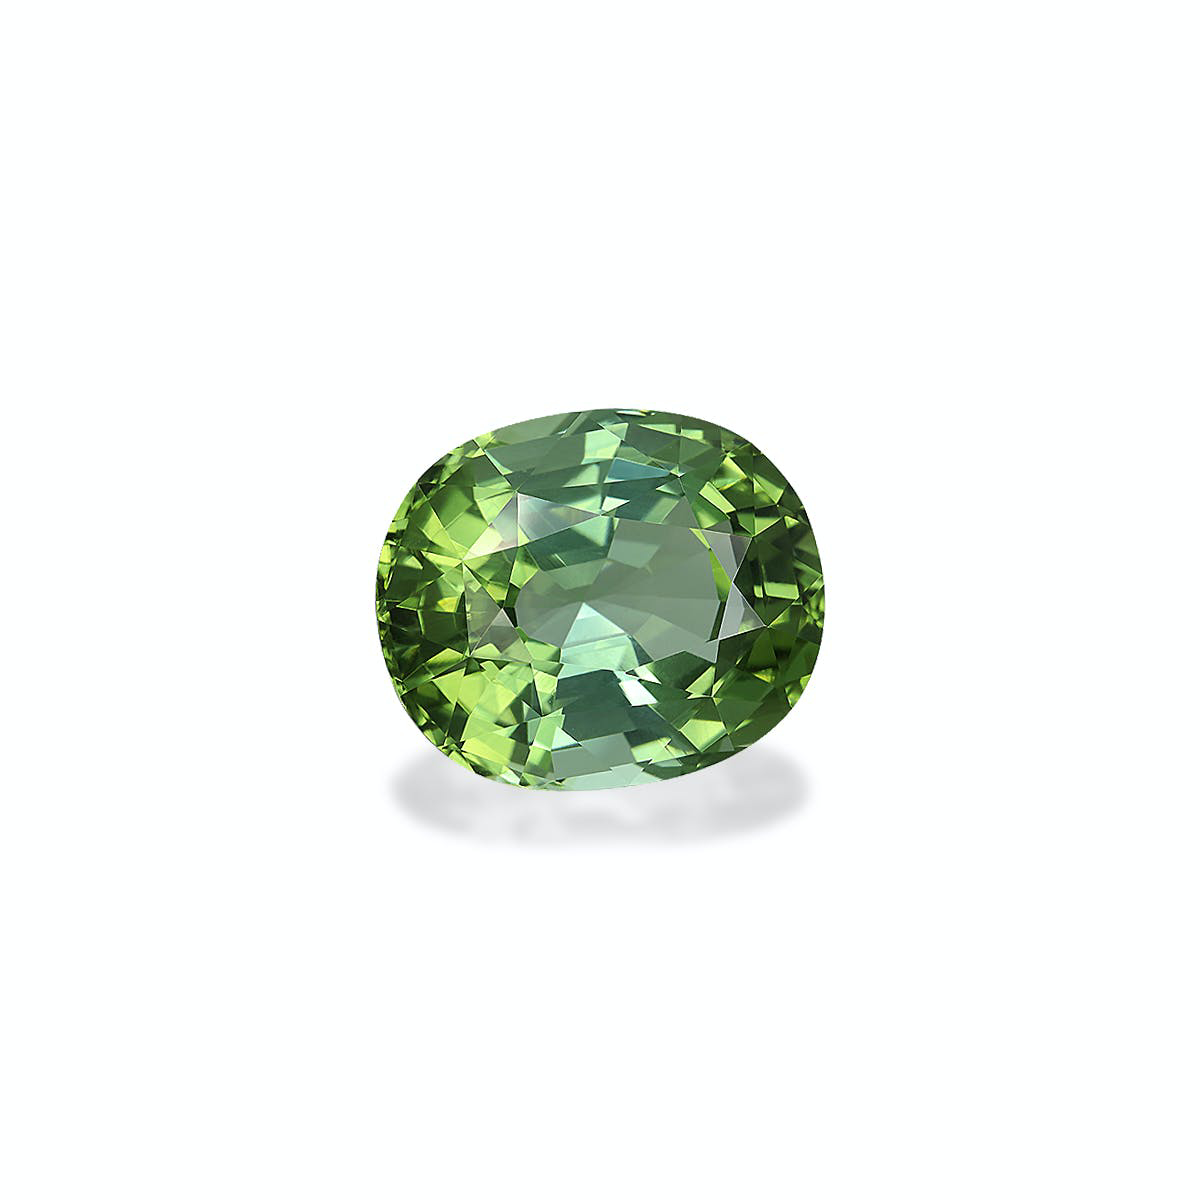 Picture of Pale Green Tourmaline 27.42ct (TG0665)